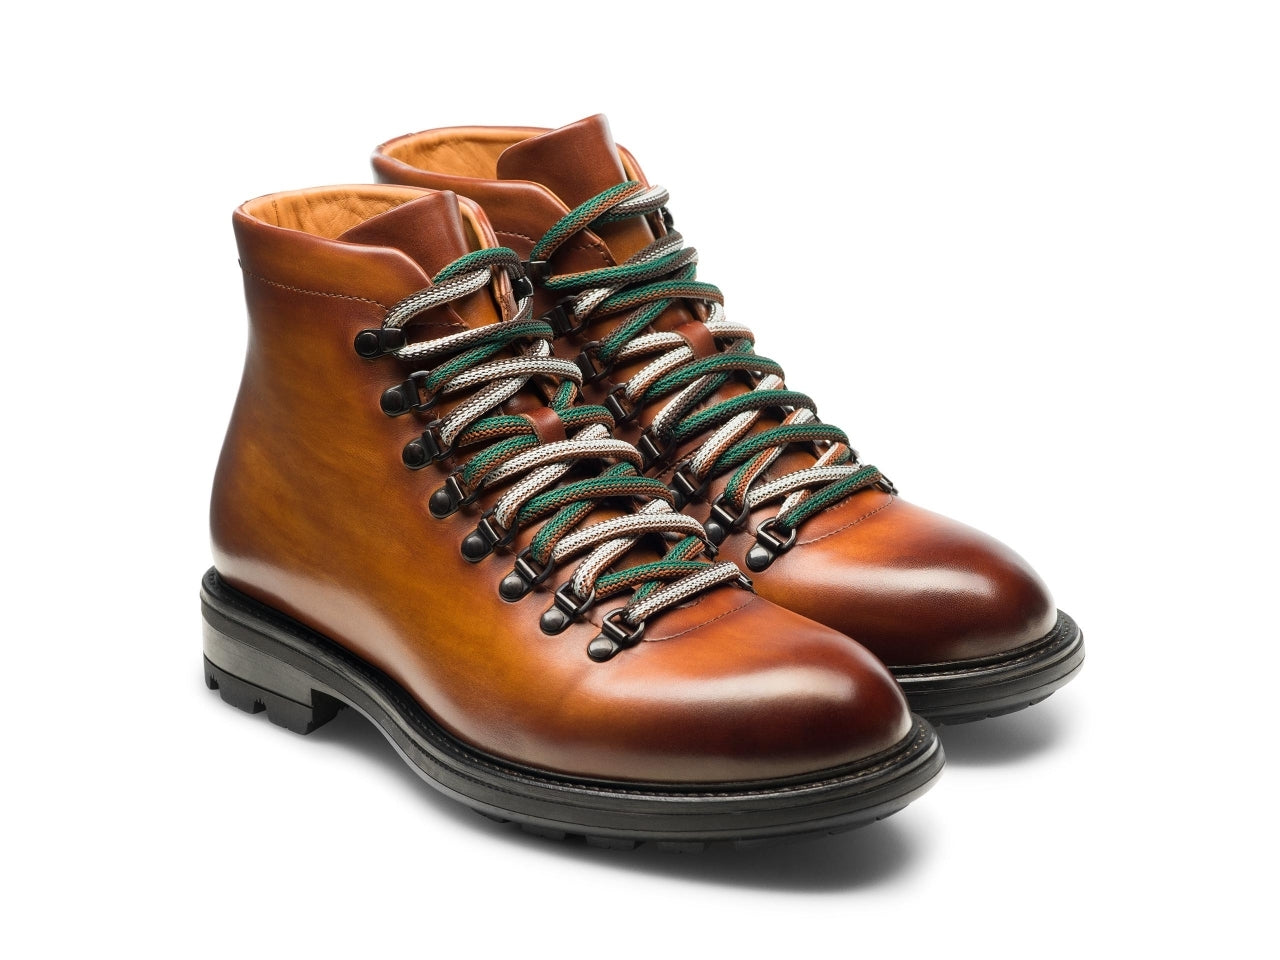 Brown men's Magnanni Montana hiking boots on a white background.